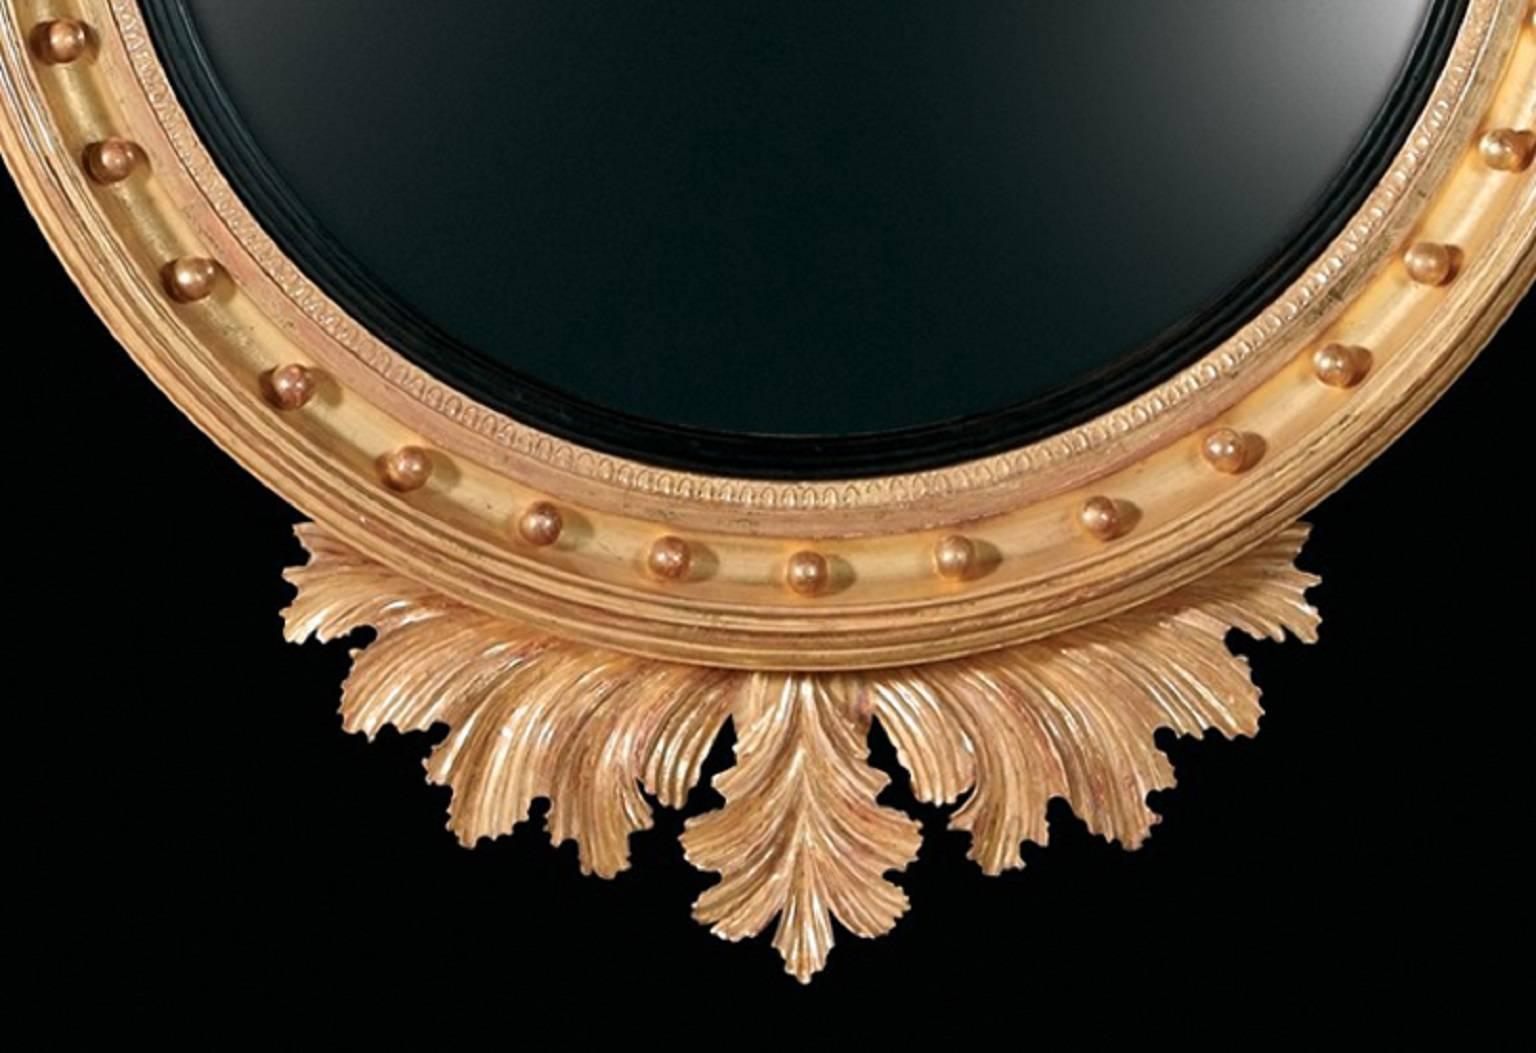 A Regency style carved giltwood round / circular convex looking glass mirror with ebonized inner slip and ball decorated moulded frame. The ebonized eagle cresting sits upon a tapered and reeded plinth flanked by scrolling acanthus leaves and with a